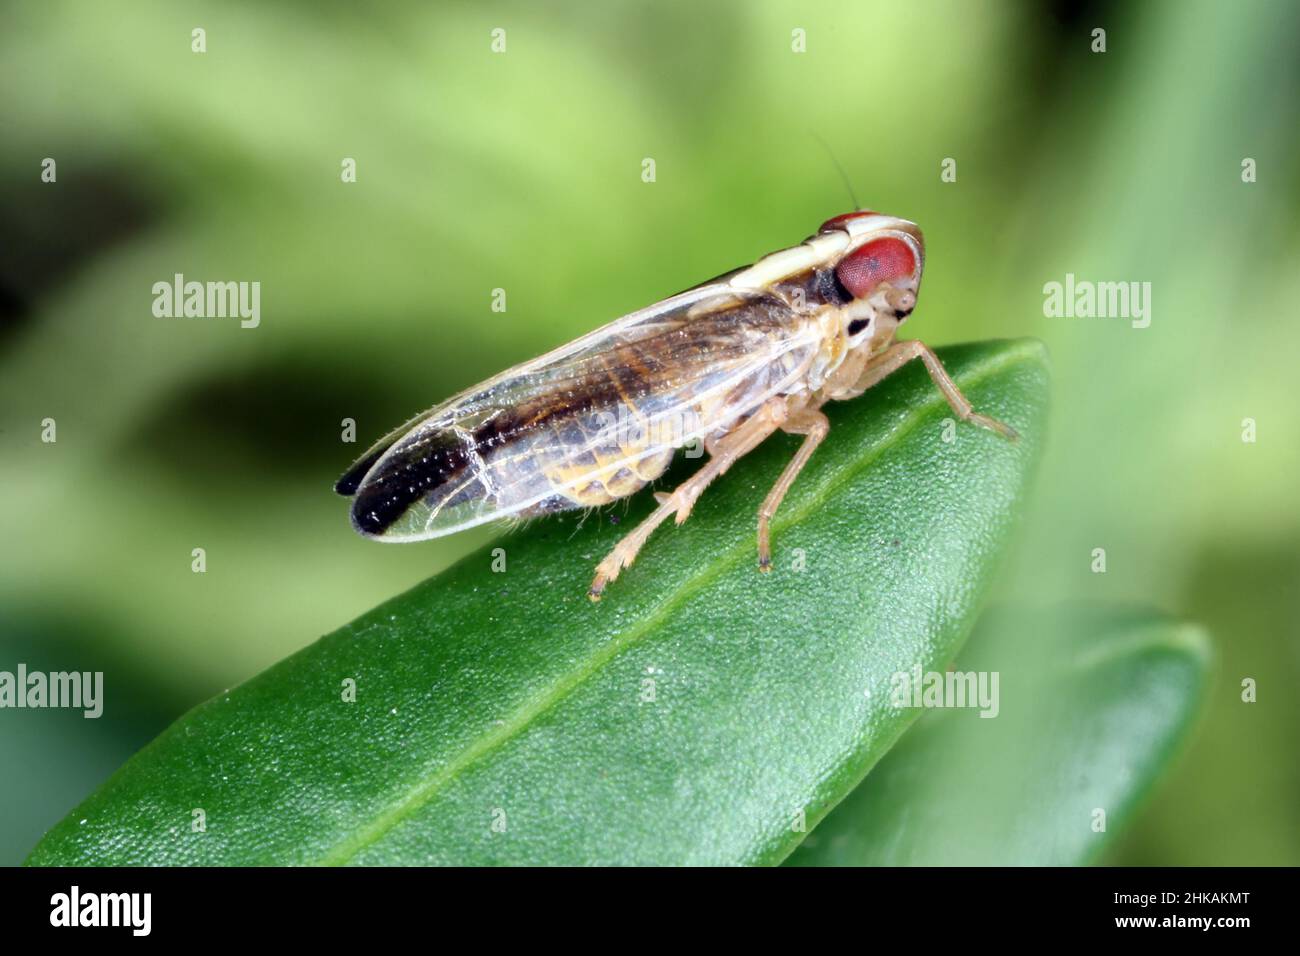 Delphacid planthoppers of  genus Kelisia in the family Delphacidae. Insect on a leaf. Stock Photo